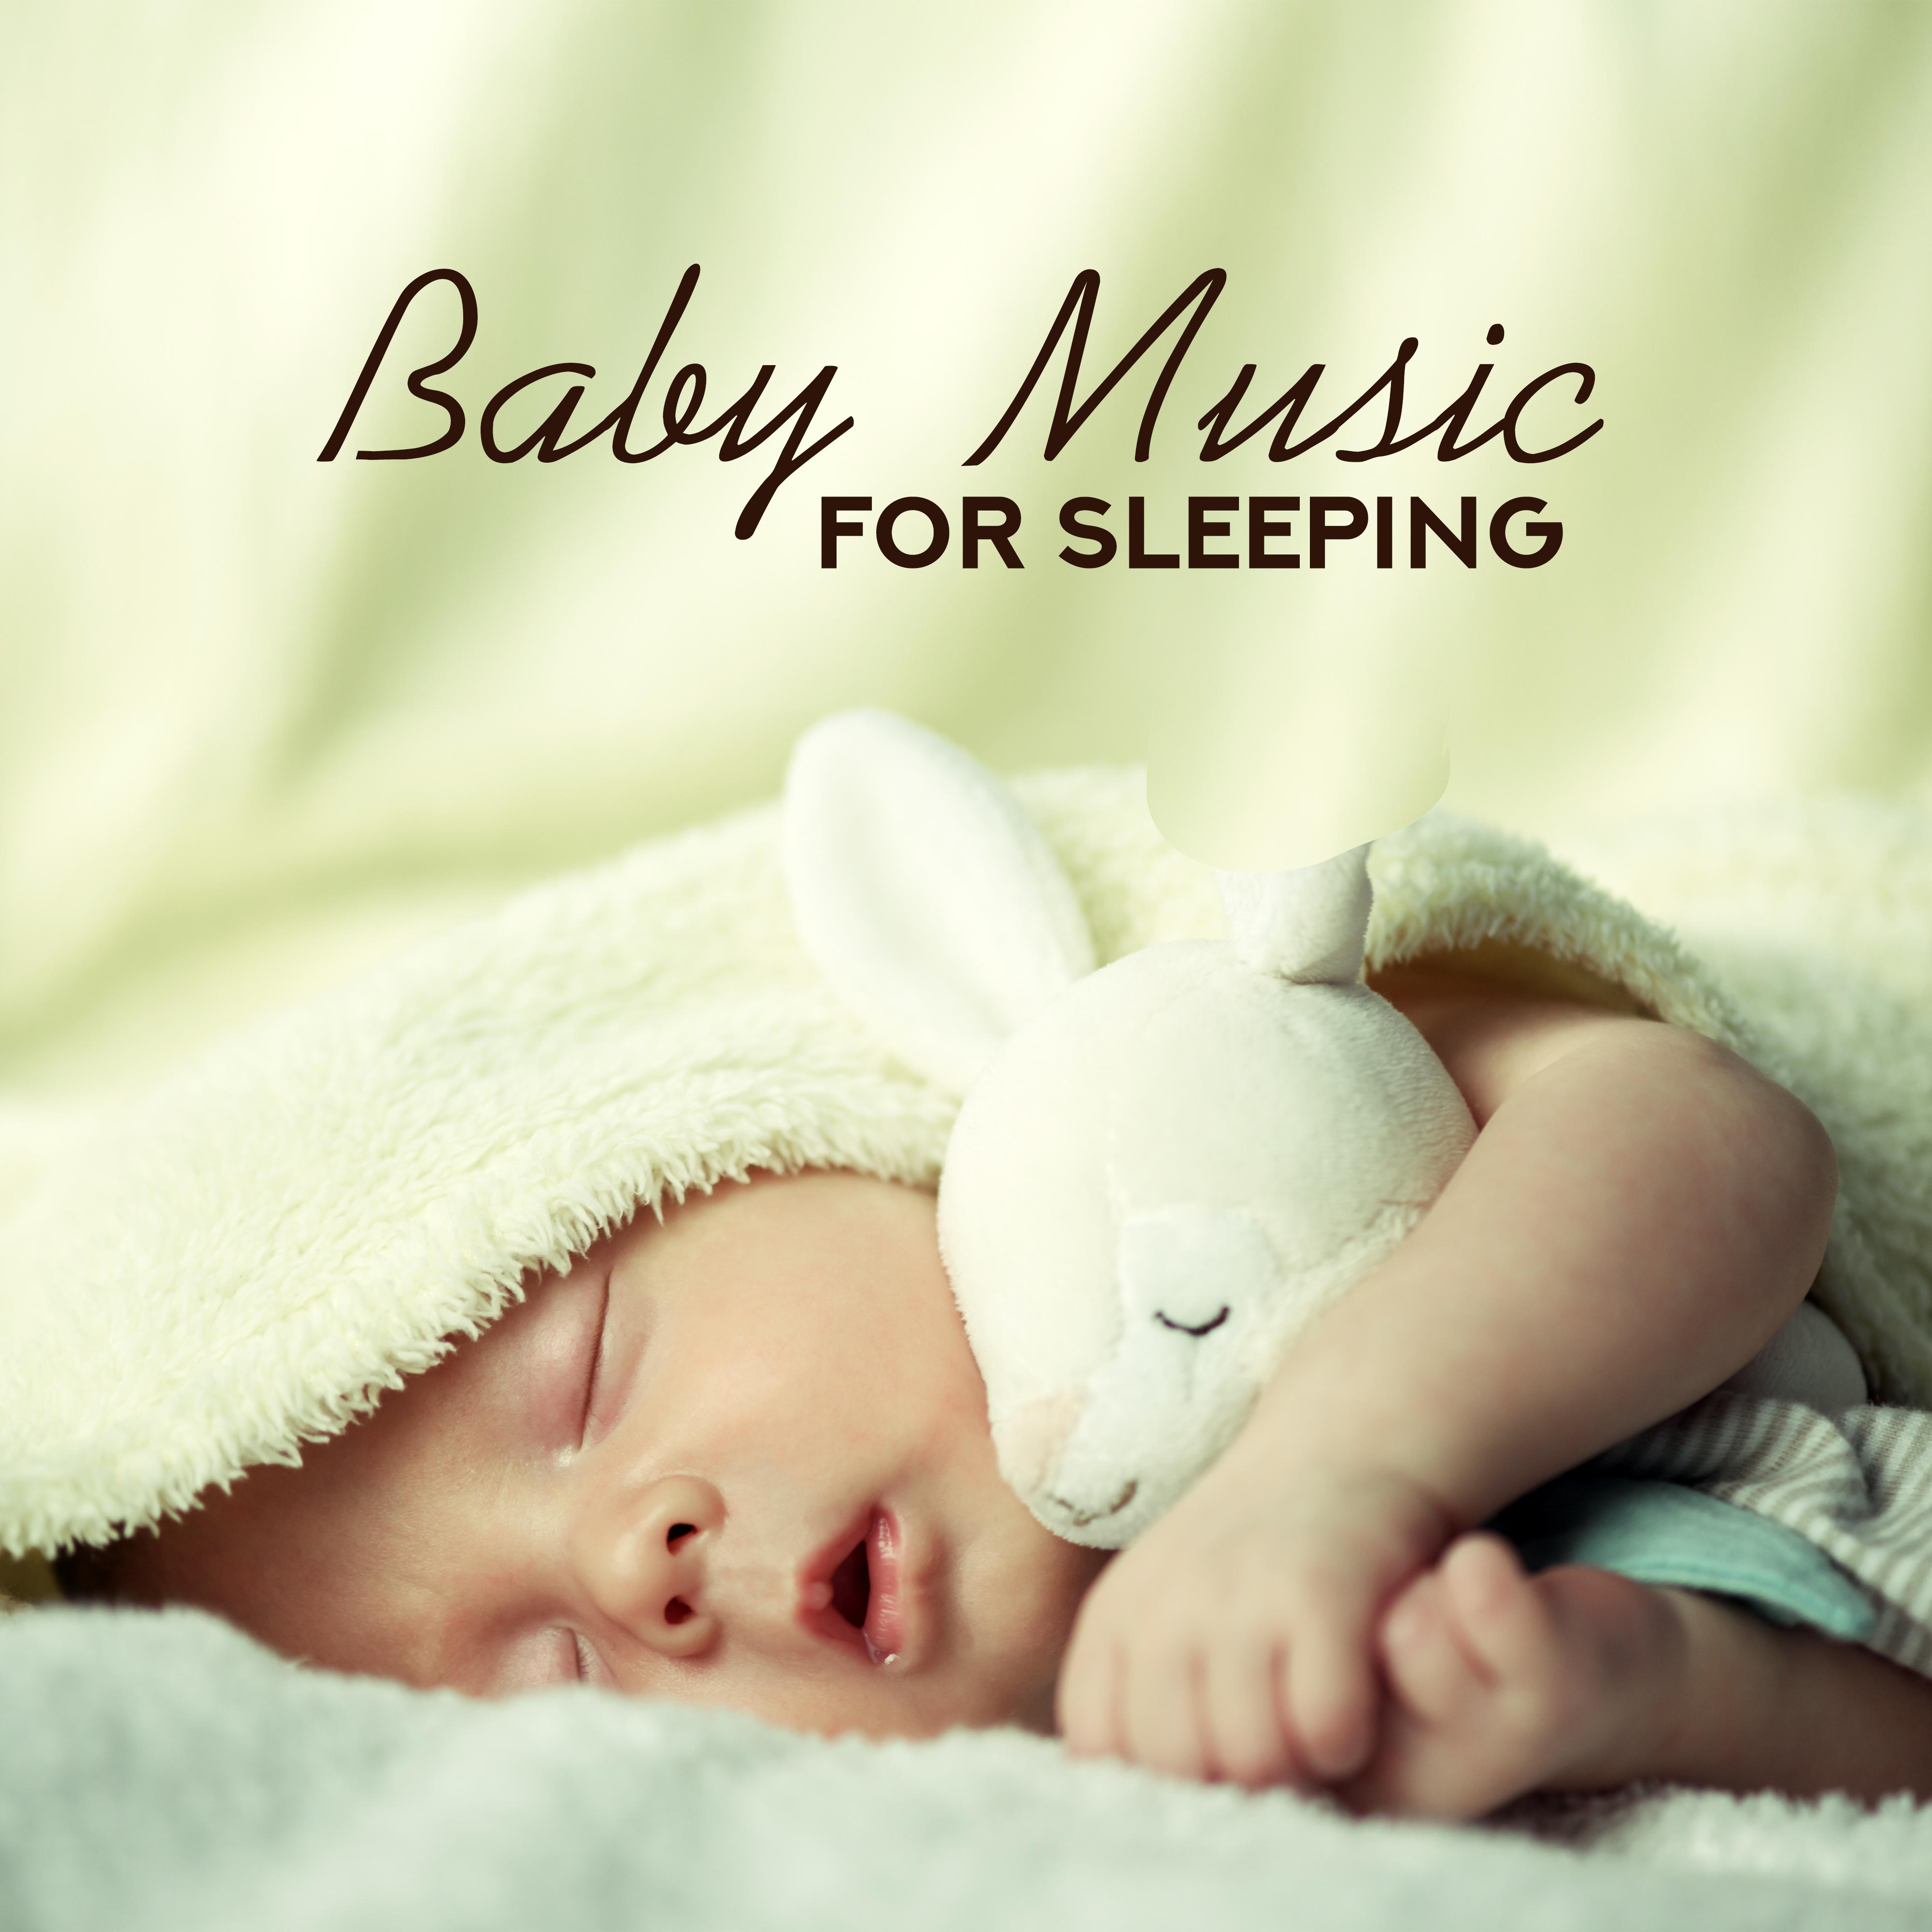 Baby Music for Sleeping: Bedtime Baby, Sweet Noises for Insomnia, Relaxing Night Music for Kids, Calm Sleep, Soothing Lullabies